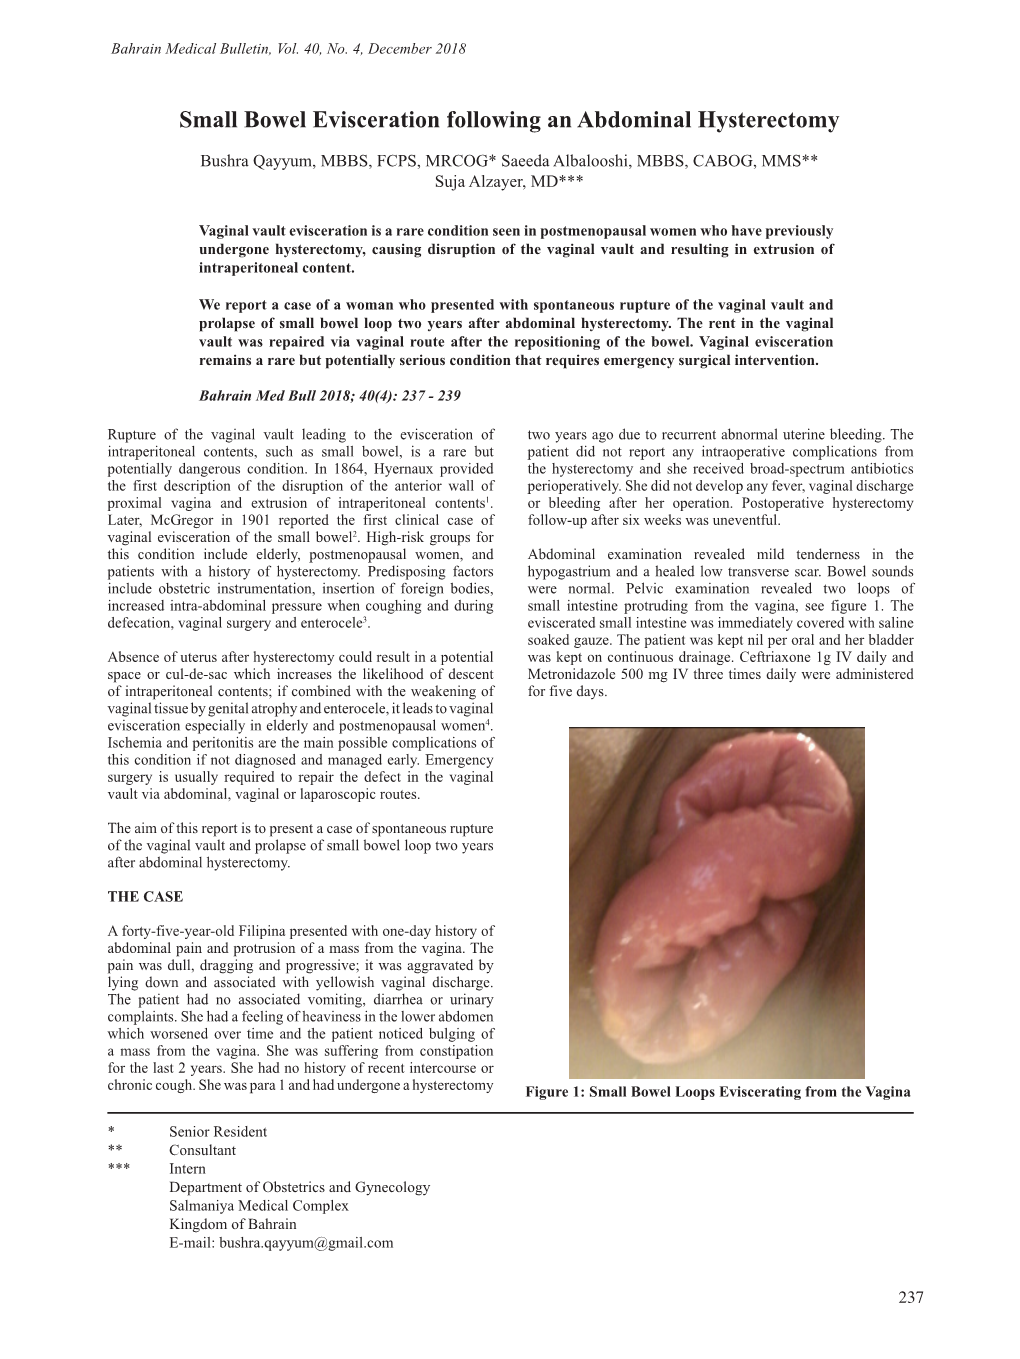 Small Bowel Evisceration Following an Abdominal Hysterectomy